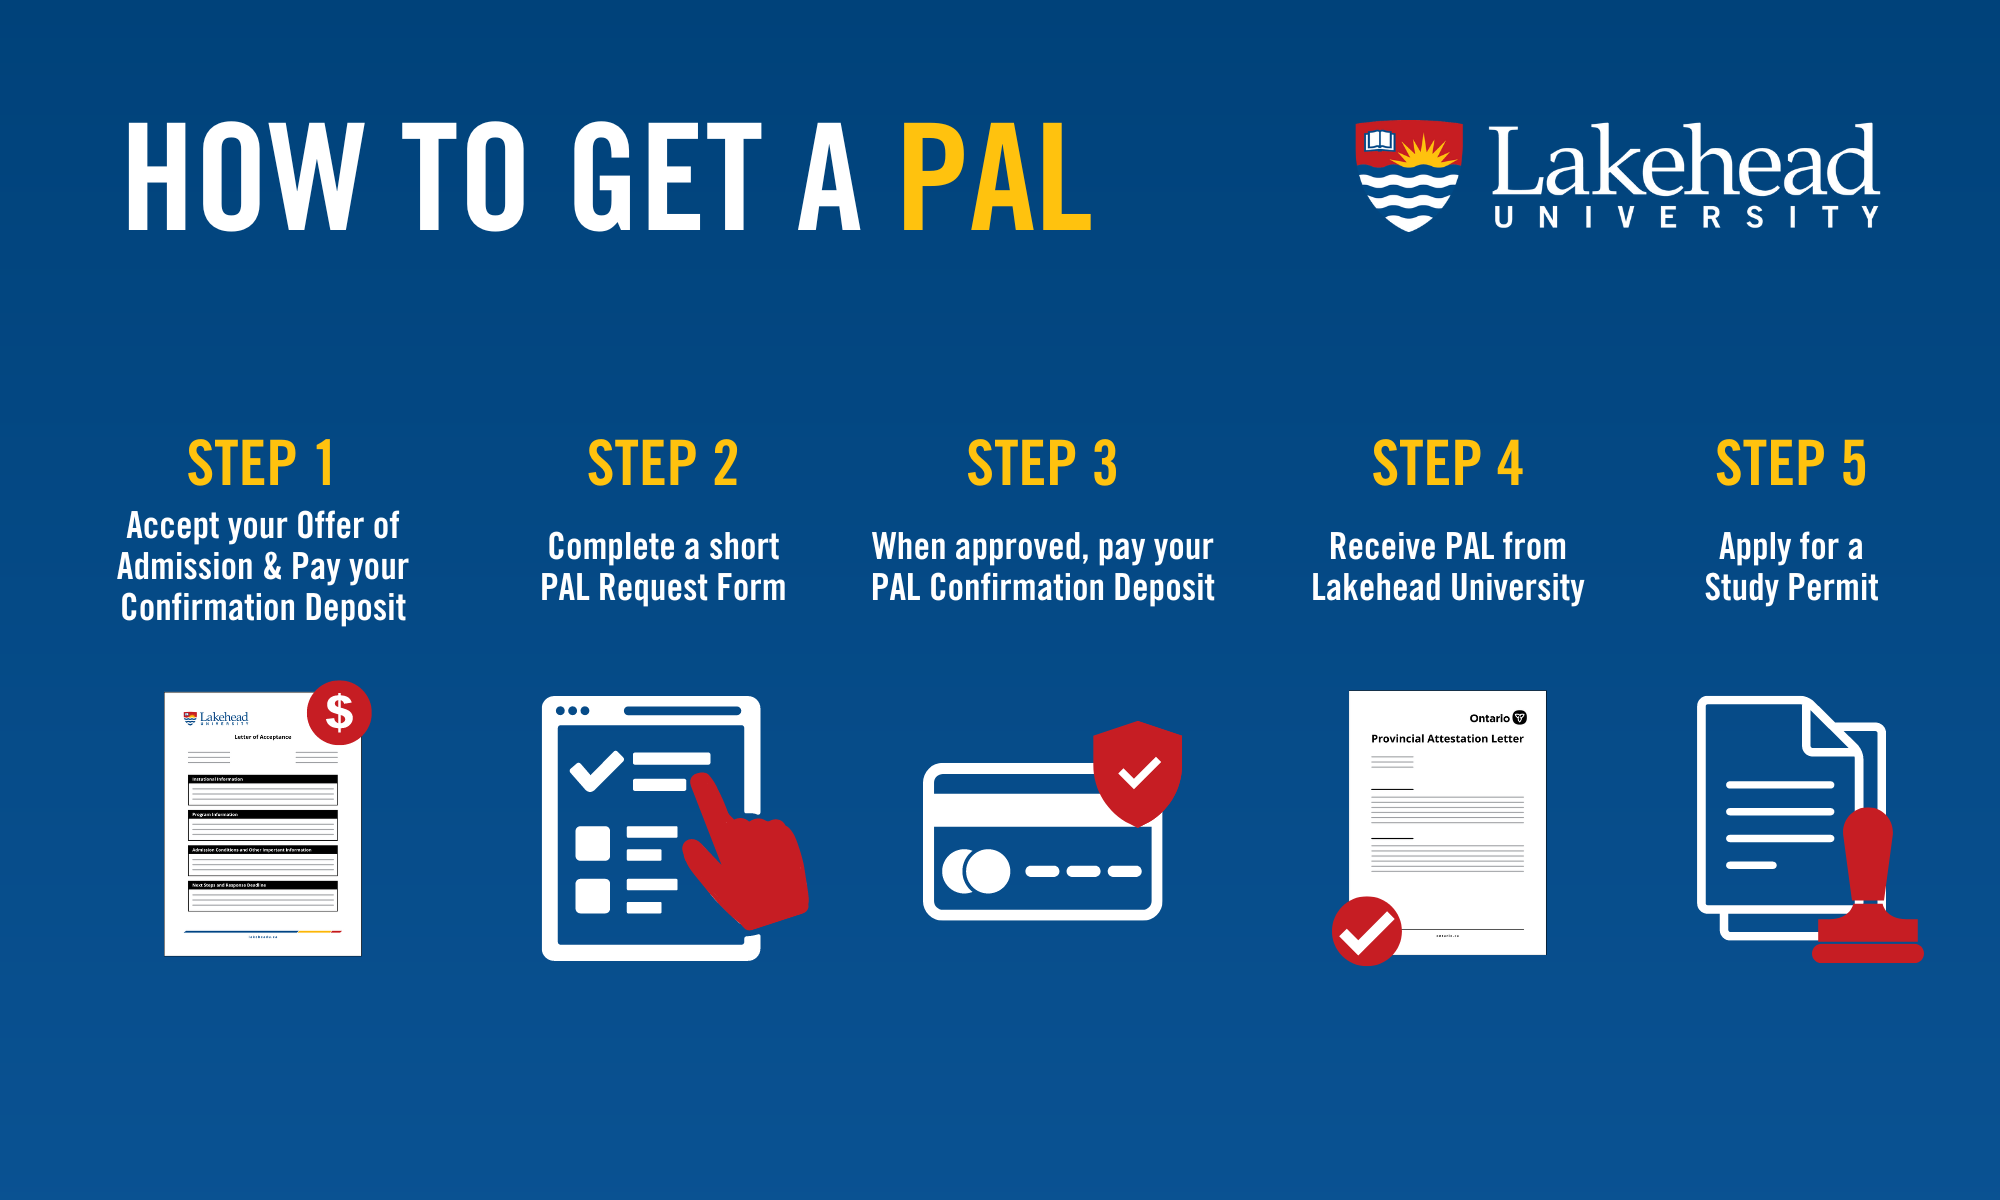 1. Accept your Offer of Admission & Pay your Confirmation Deposit to secure your study spot 2. Complete a short PAL Request Form 3. When approved, pay your PAL Confirmation Deposit 4. Receive PAL from Lakehead University 5. Apply for Study Permit